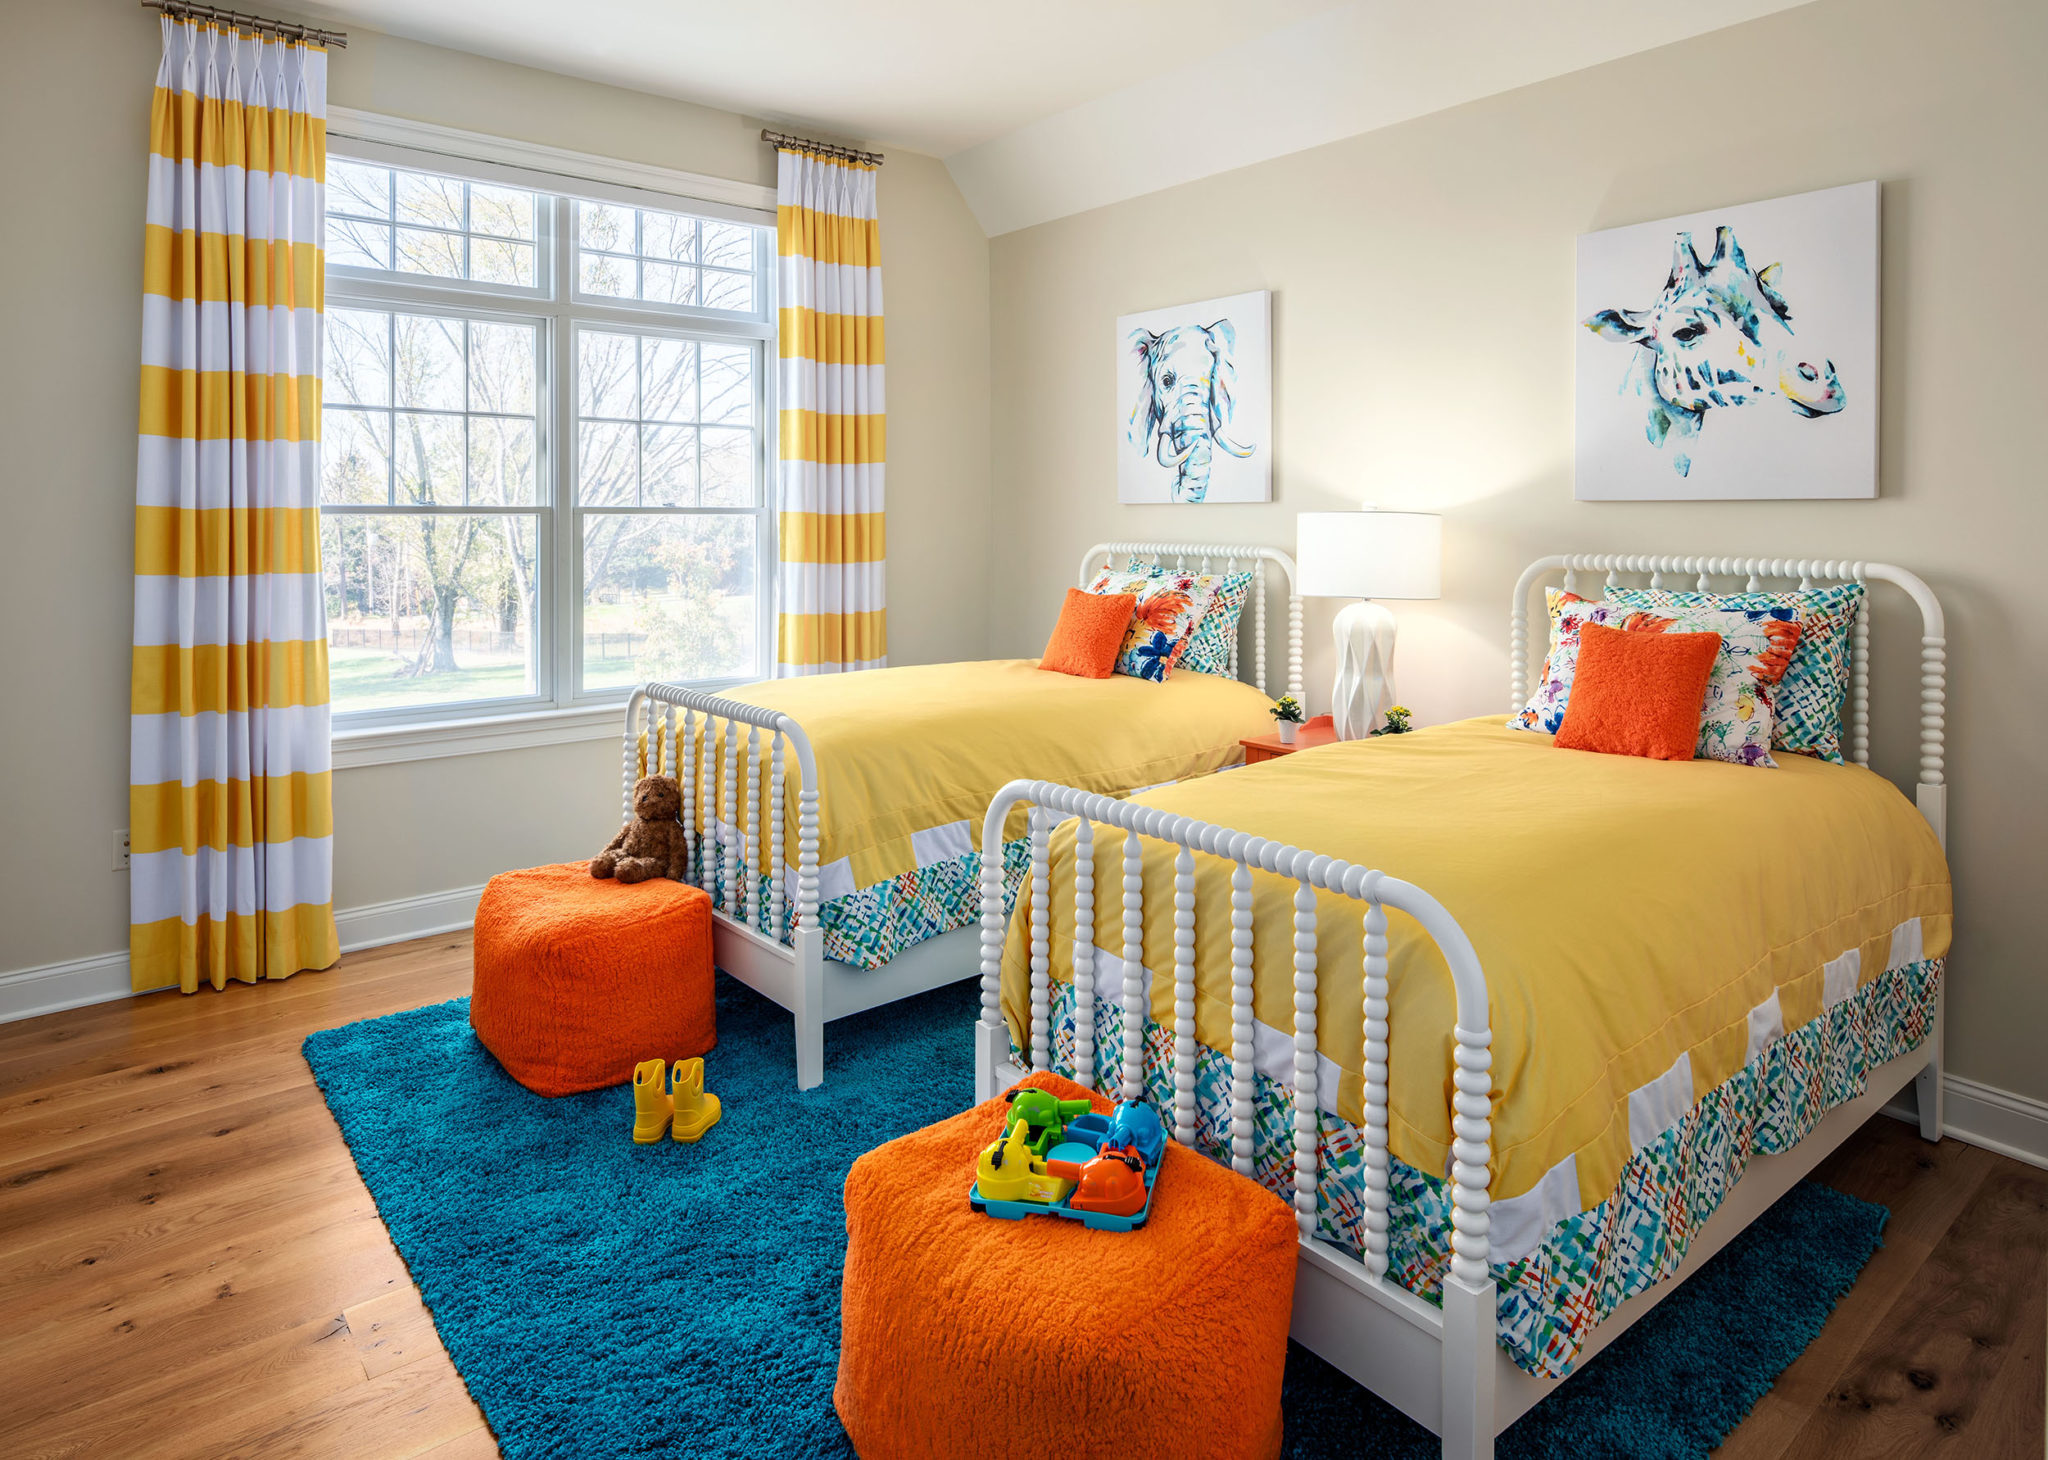 Kid’s Room Design for Every Age